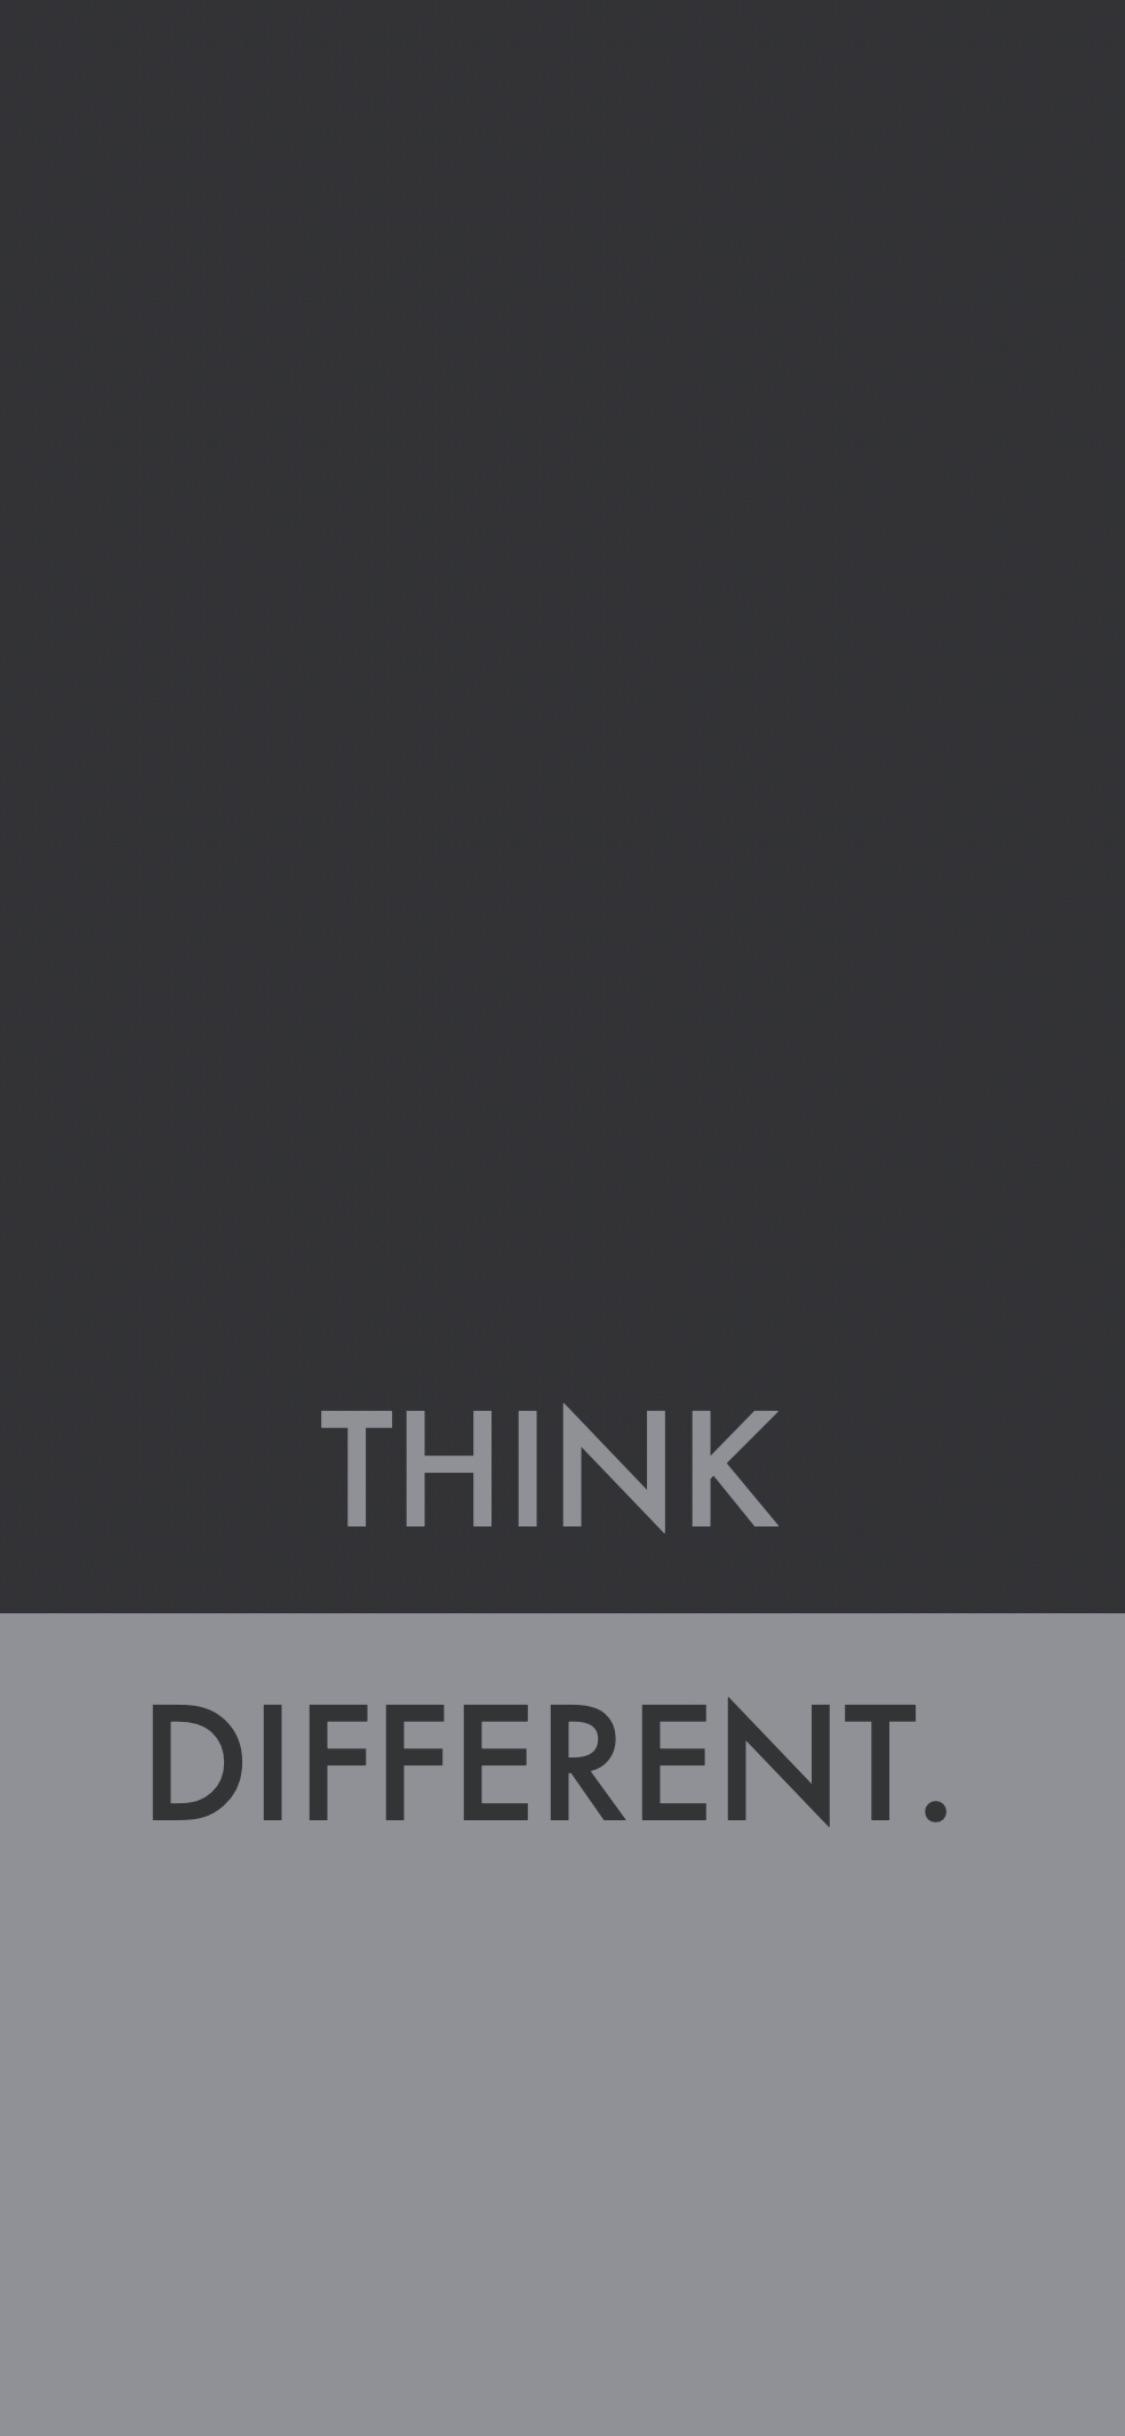 Think Different Wallpaper For Iphone - Think Different Wallpaper Iphone , HD Wallpaper & Backgrounds